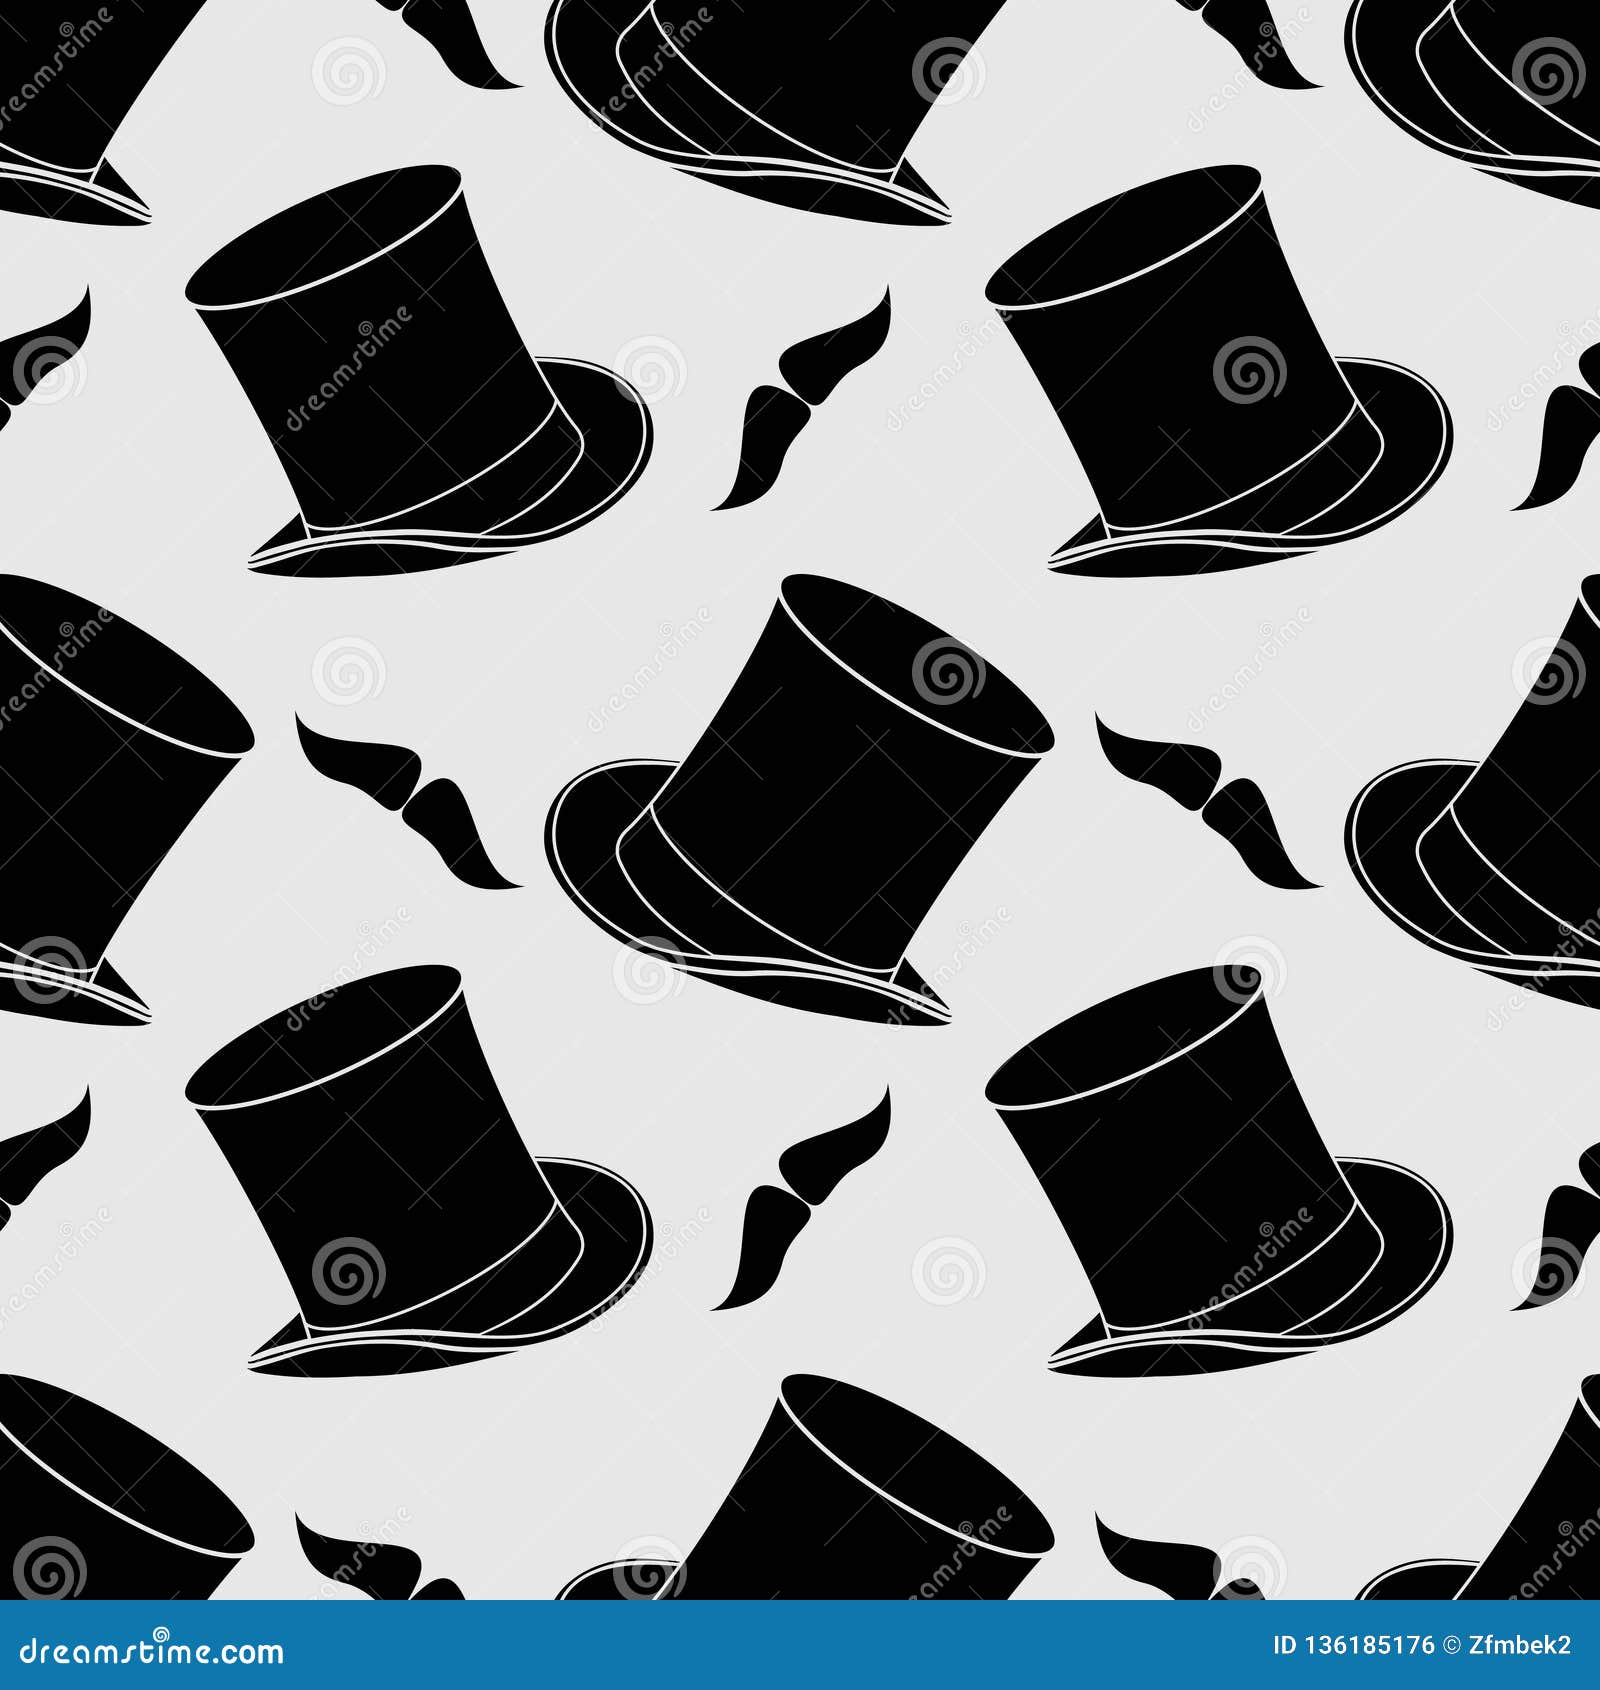 Top Hat and Mustache Seamless Pattern. Vector Illustration Stock Vector ...